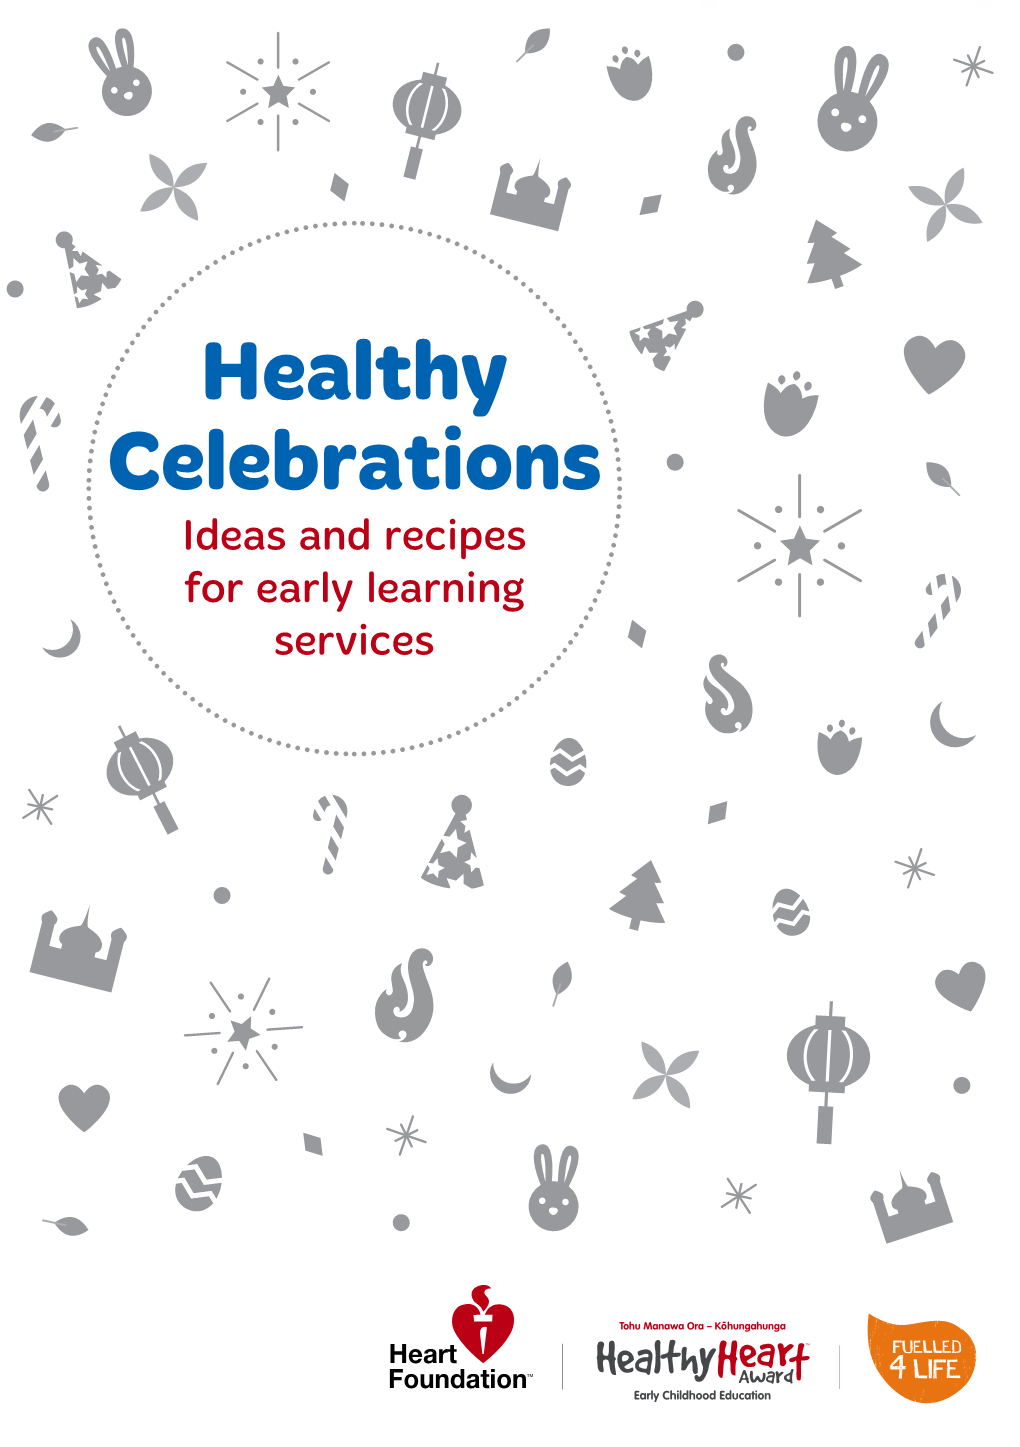 Healthy Celebrations Ideas and Recipes for Early Learning Services